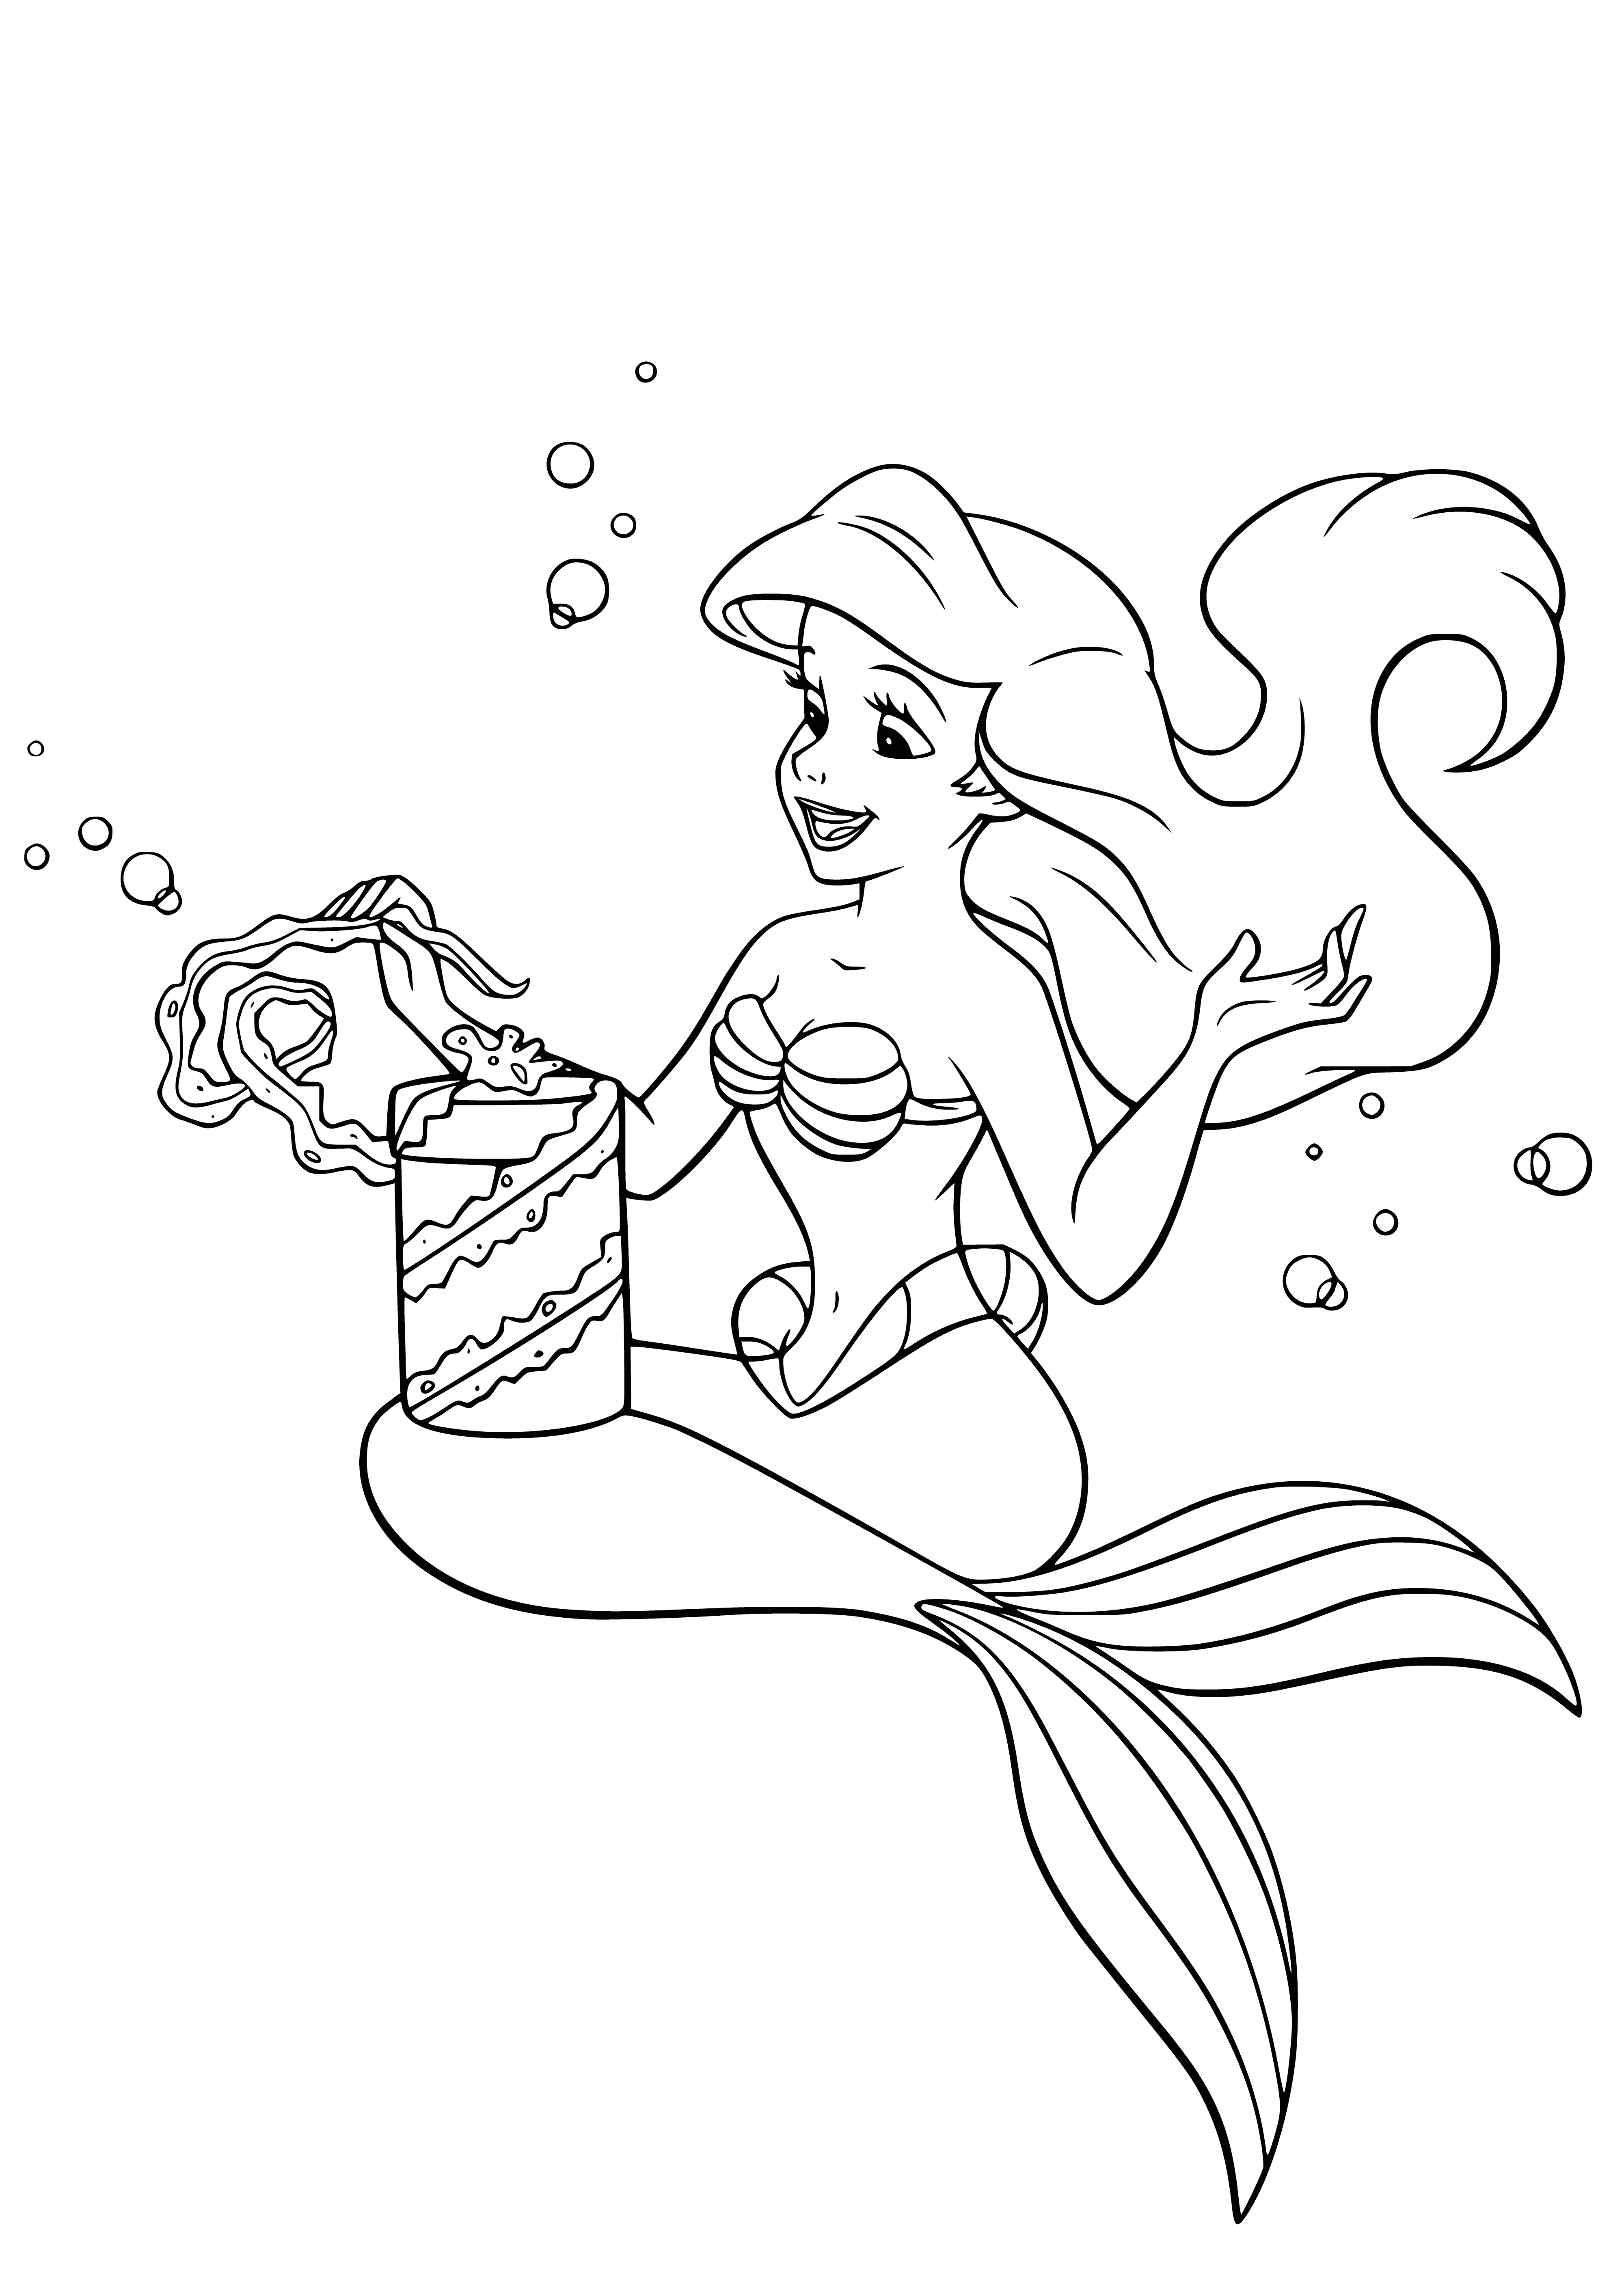 Ariel received a New Year's gift coloring page